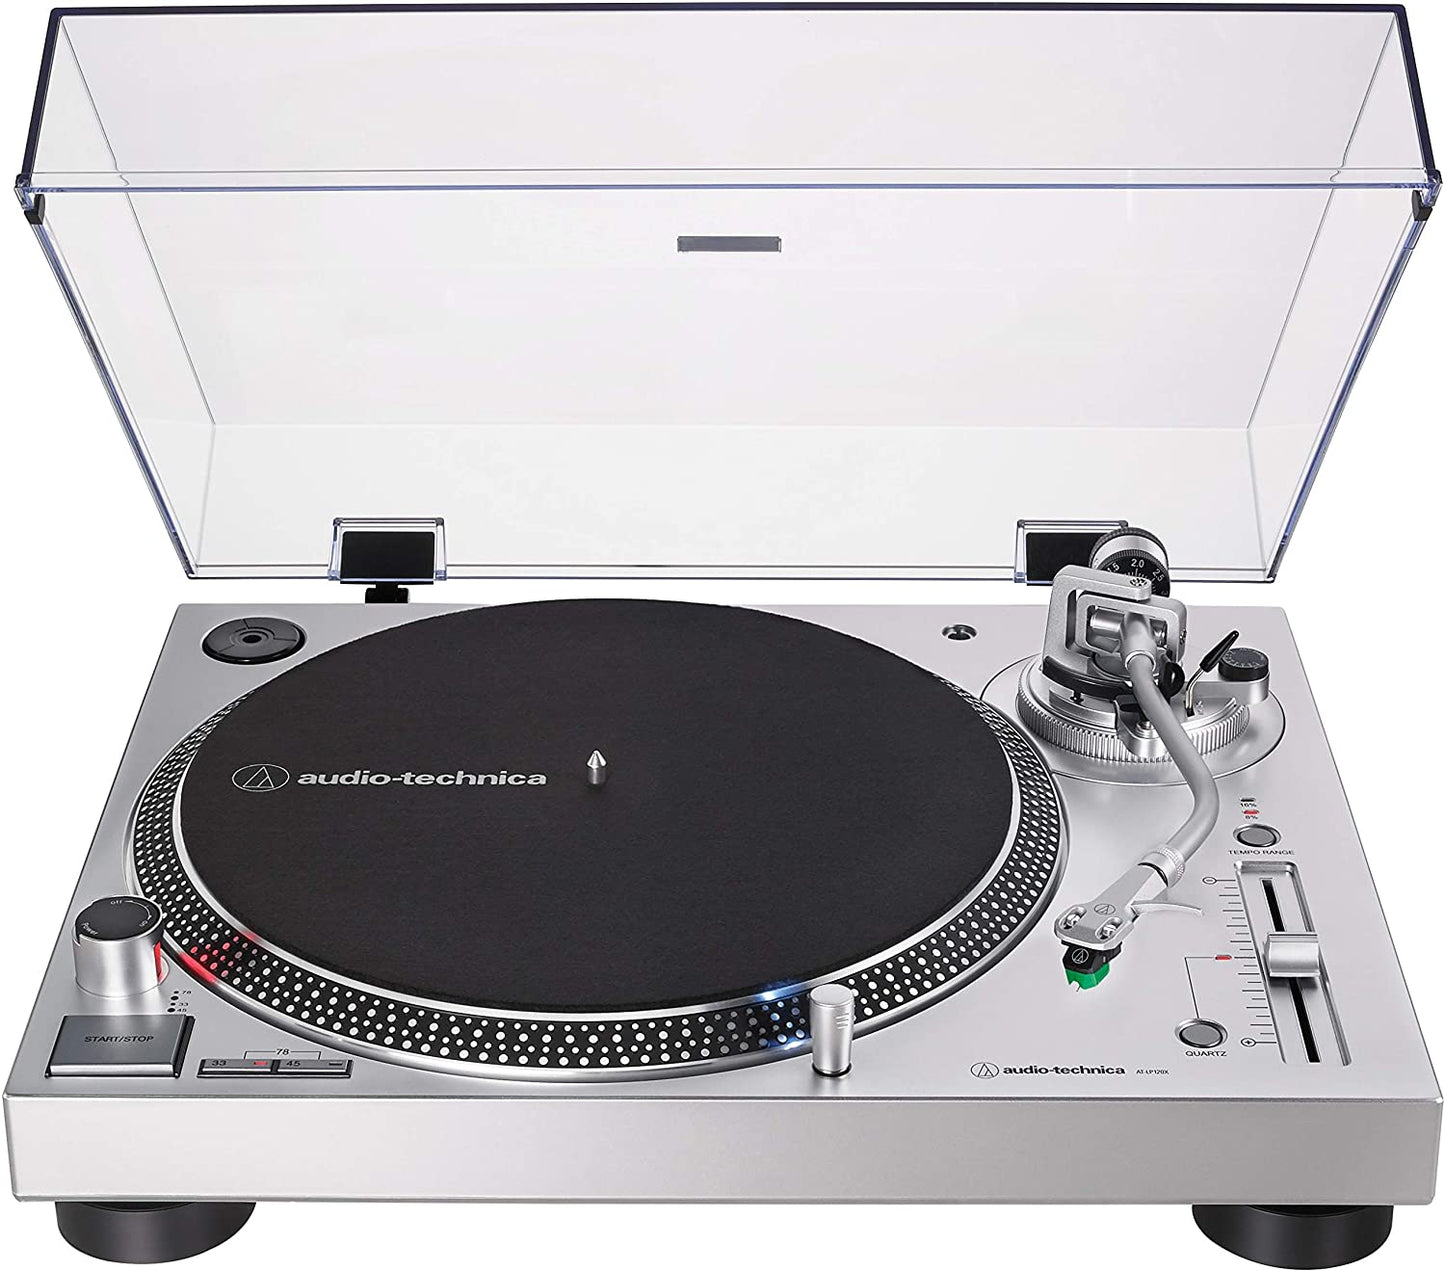 Audio-Technica AT-LP120XUSB Direct-Drive Turntable, Fully Manual, Hi-Fi, 3 Speed, Convert Vinyl to Digital, Anti-Skate and Variable Pitch Control (Analog & USB Silver)